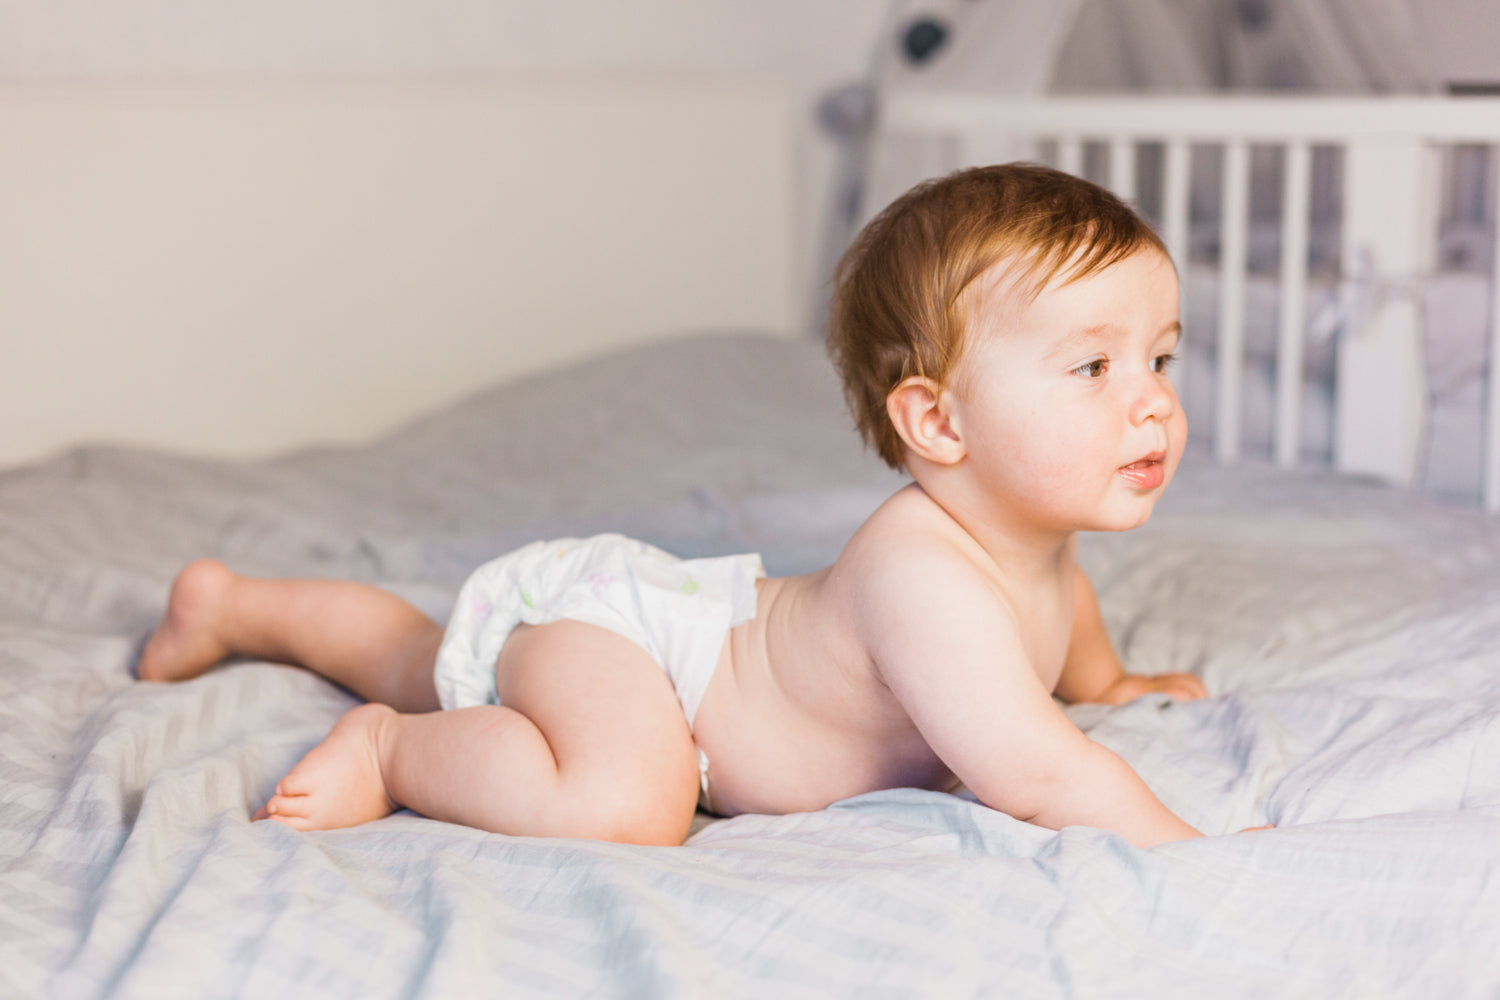 How to choose the best newborn diapers for your baby?